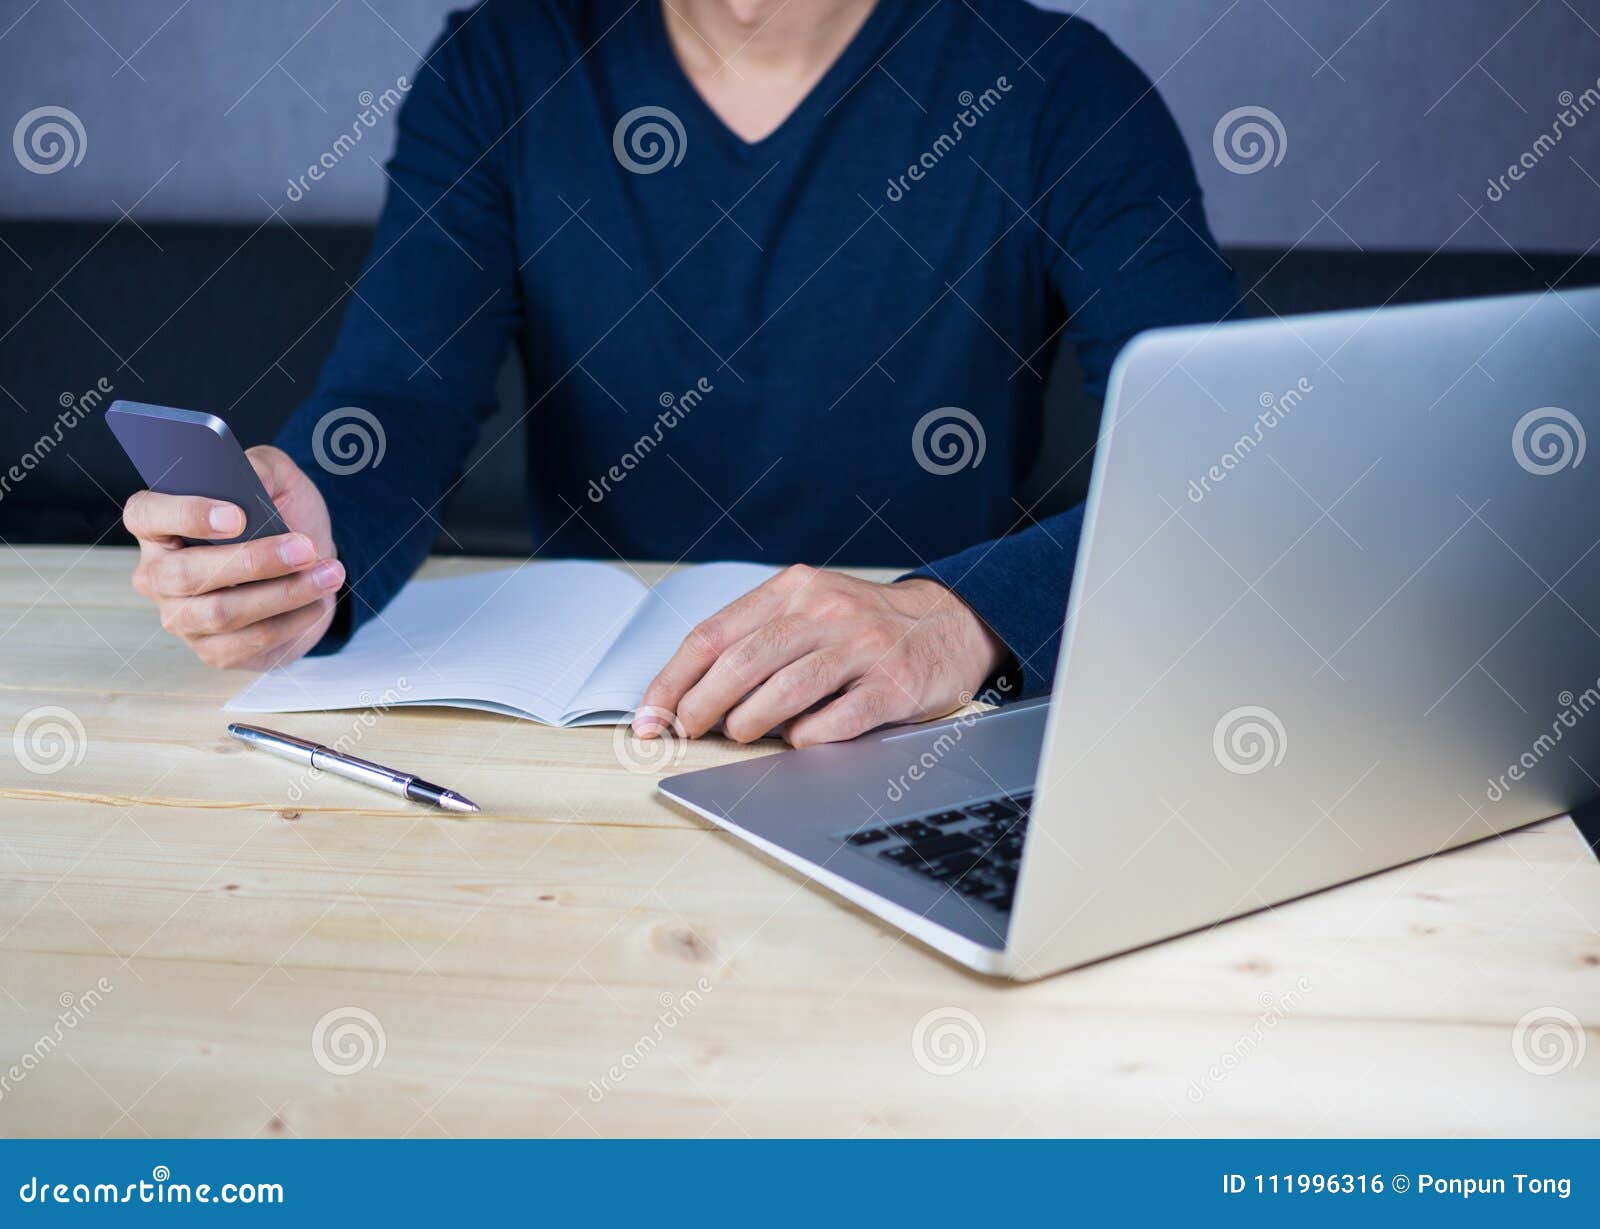 man using phone and work, distraction and busy concept